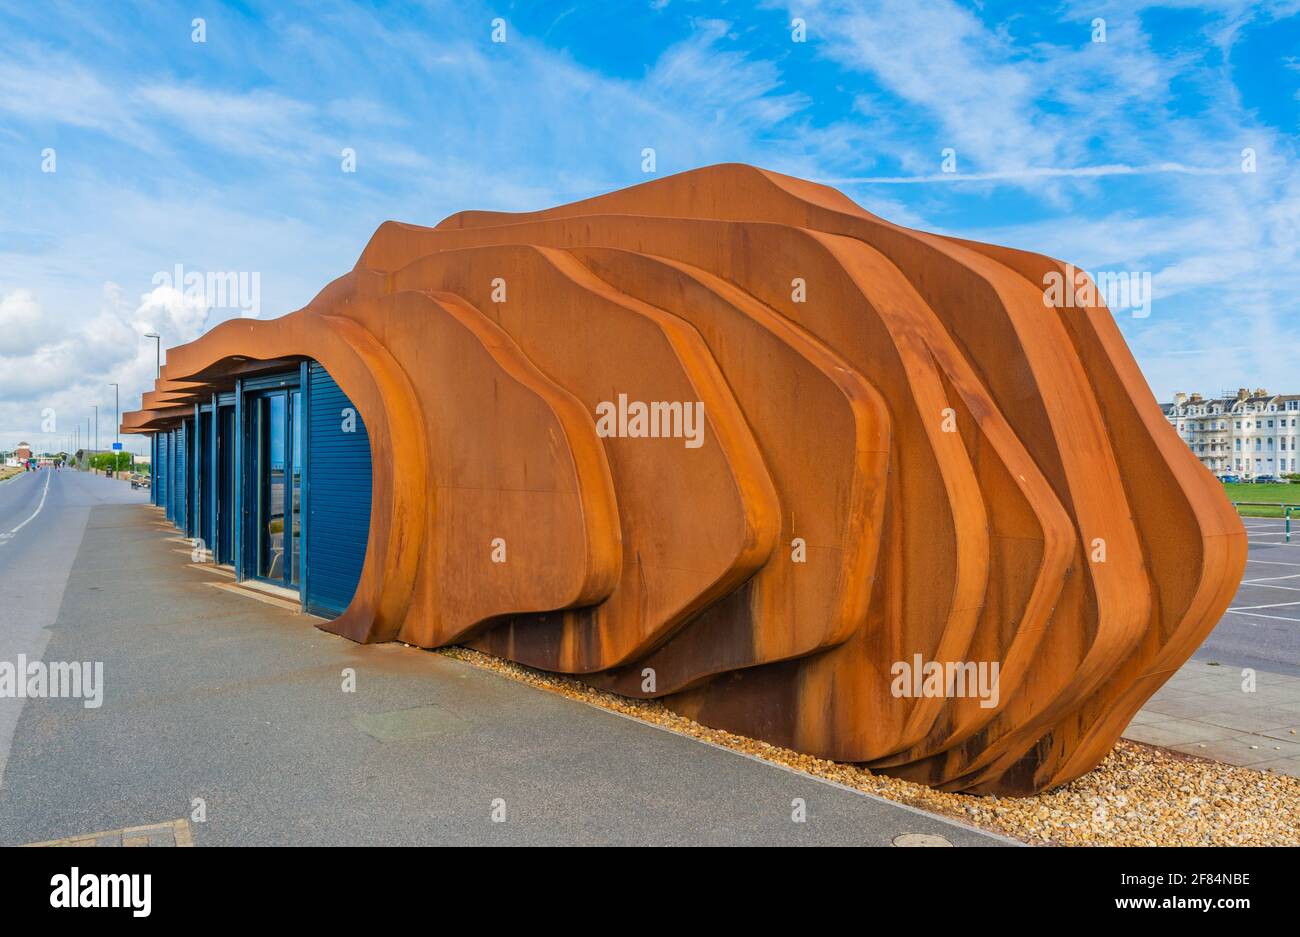 East Beach Cafe on the Promenade in Summer in Littlehampton, West Sussex, England UK. Designed by Thomas Heatherwick to resemble driftwood. Stock Photo